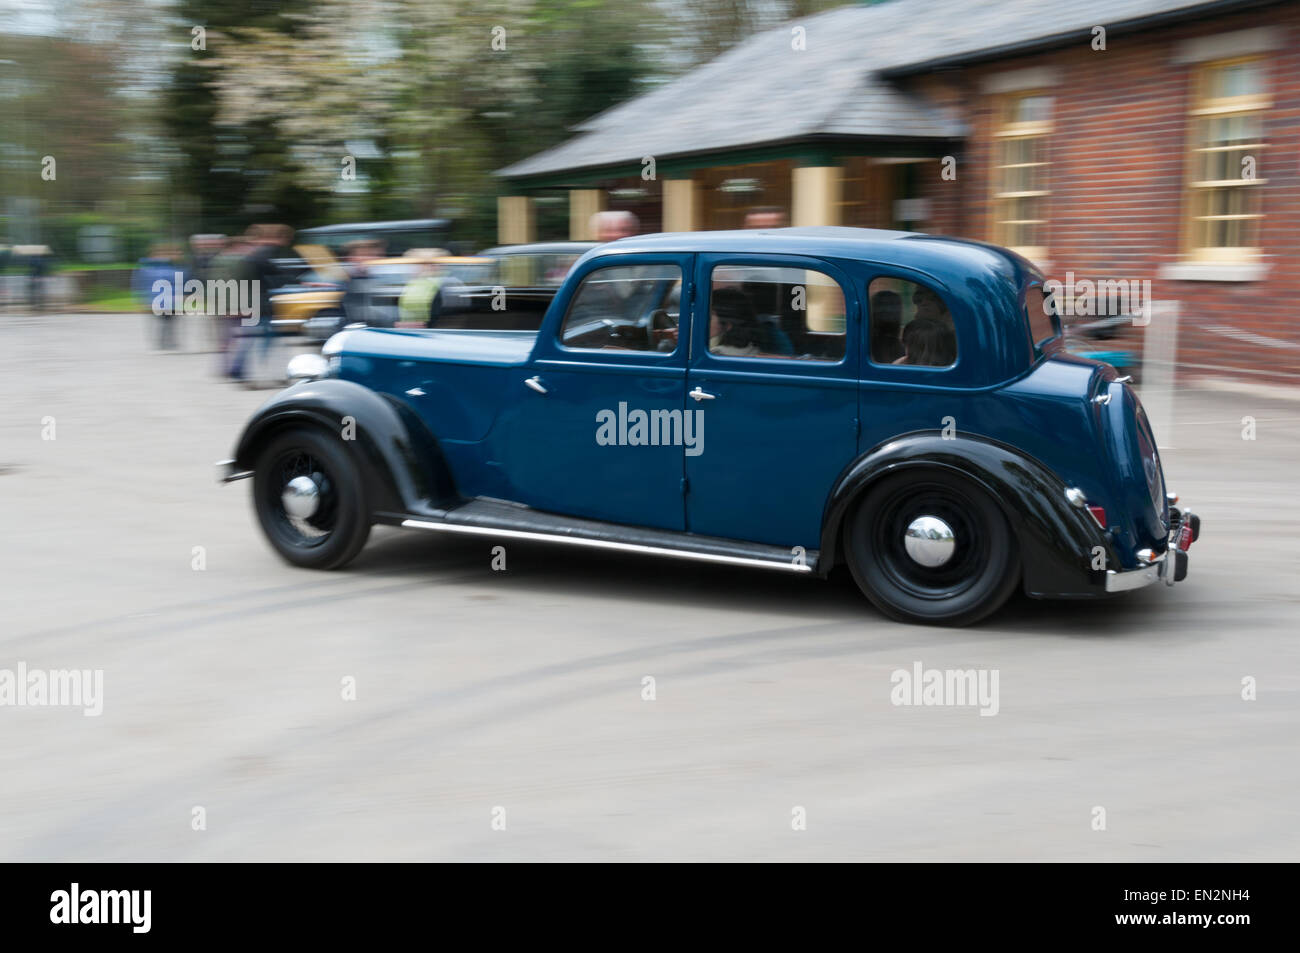 Vintage cars at the 5th Sunday Brunch Scramble in Bicester Heritage, Oxfordshire, England Stock Photo